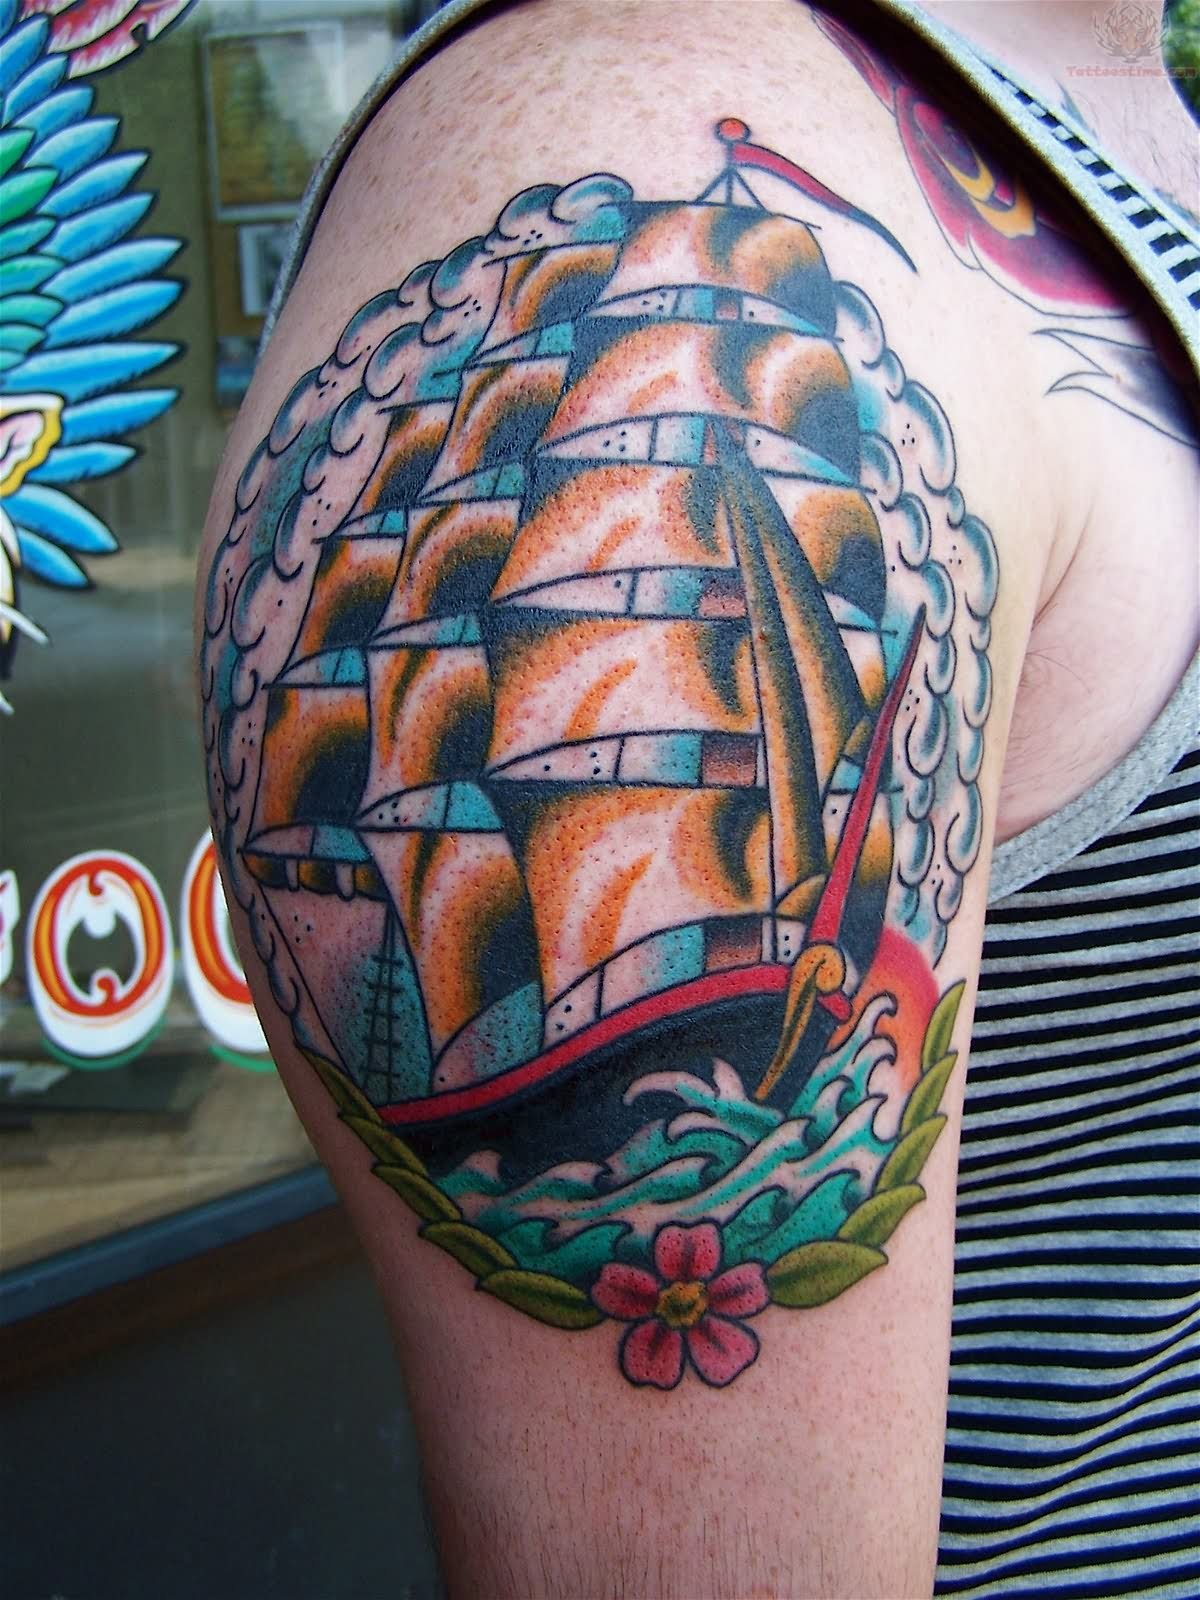 Traditional Ship Tattoos Designs, Ideas and Meaning - Tattoos For You